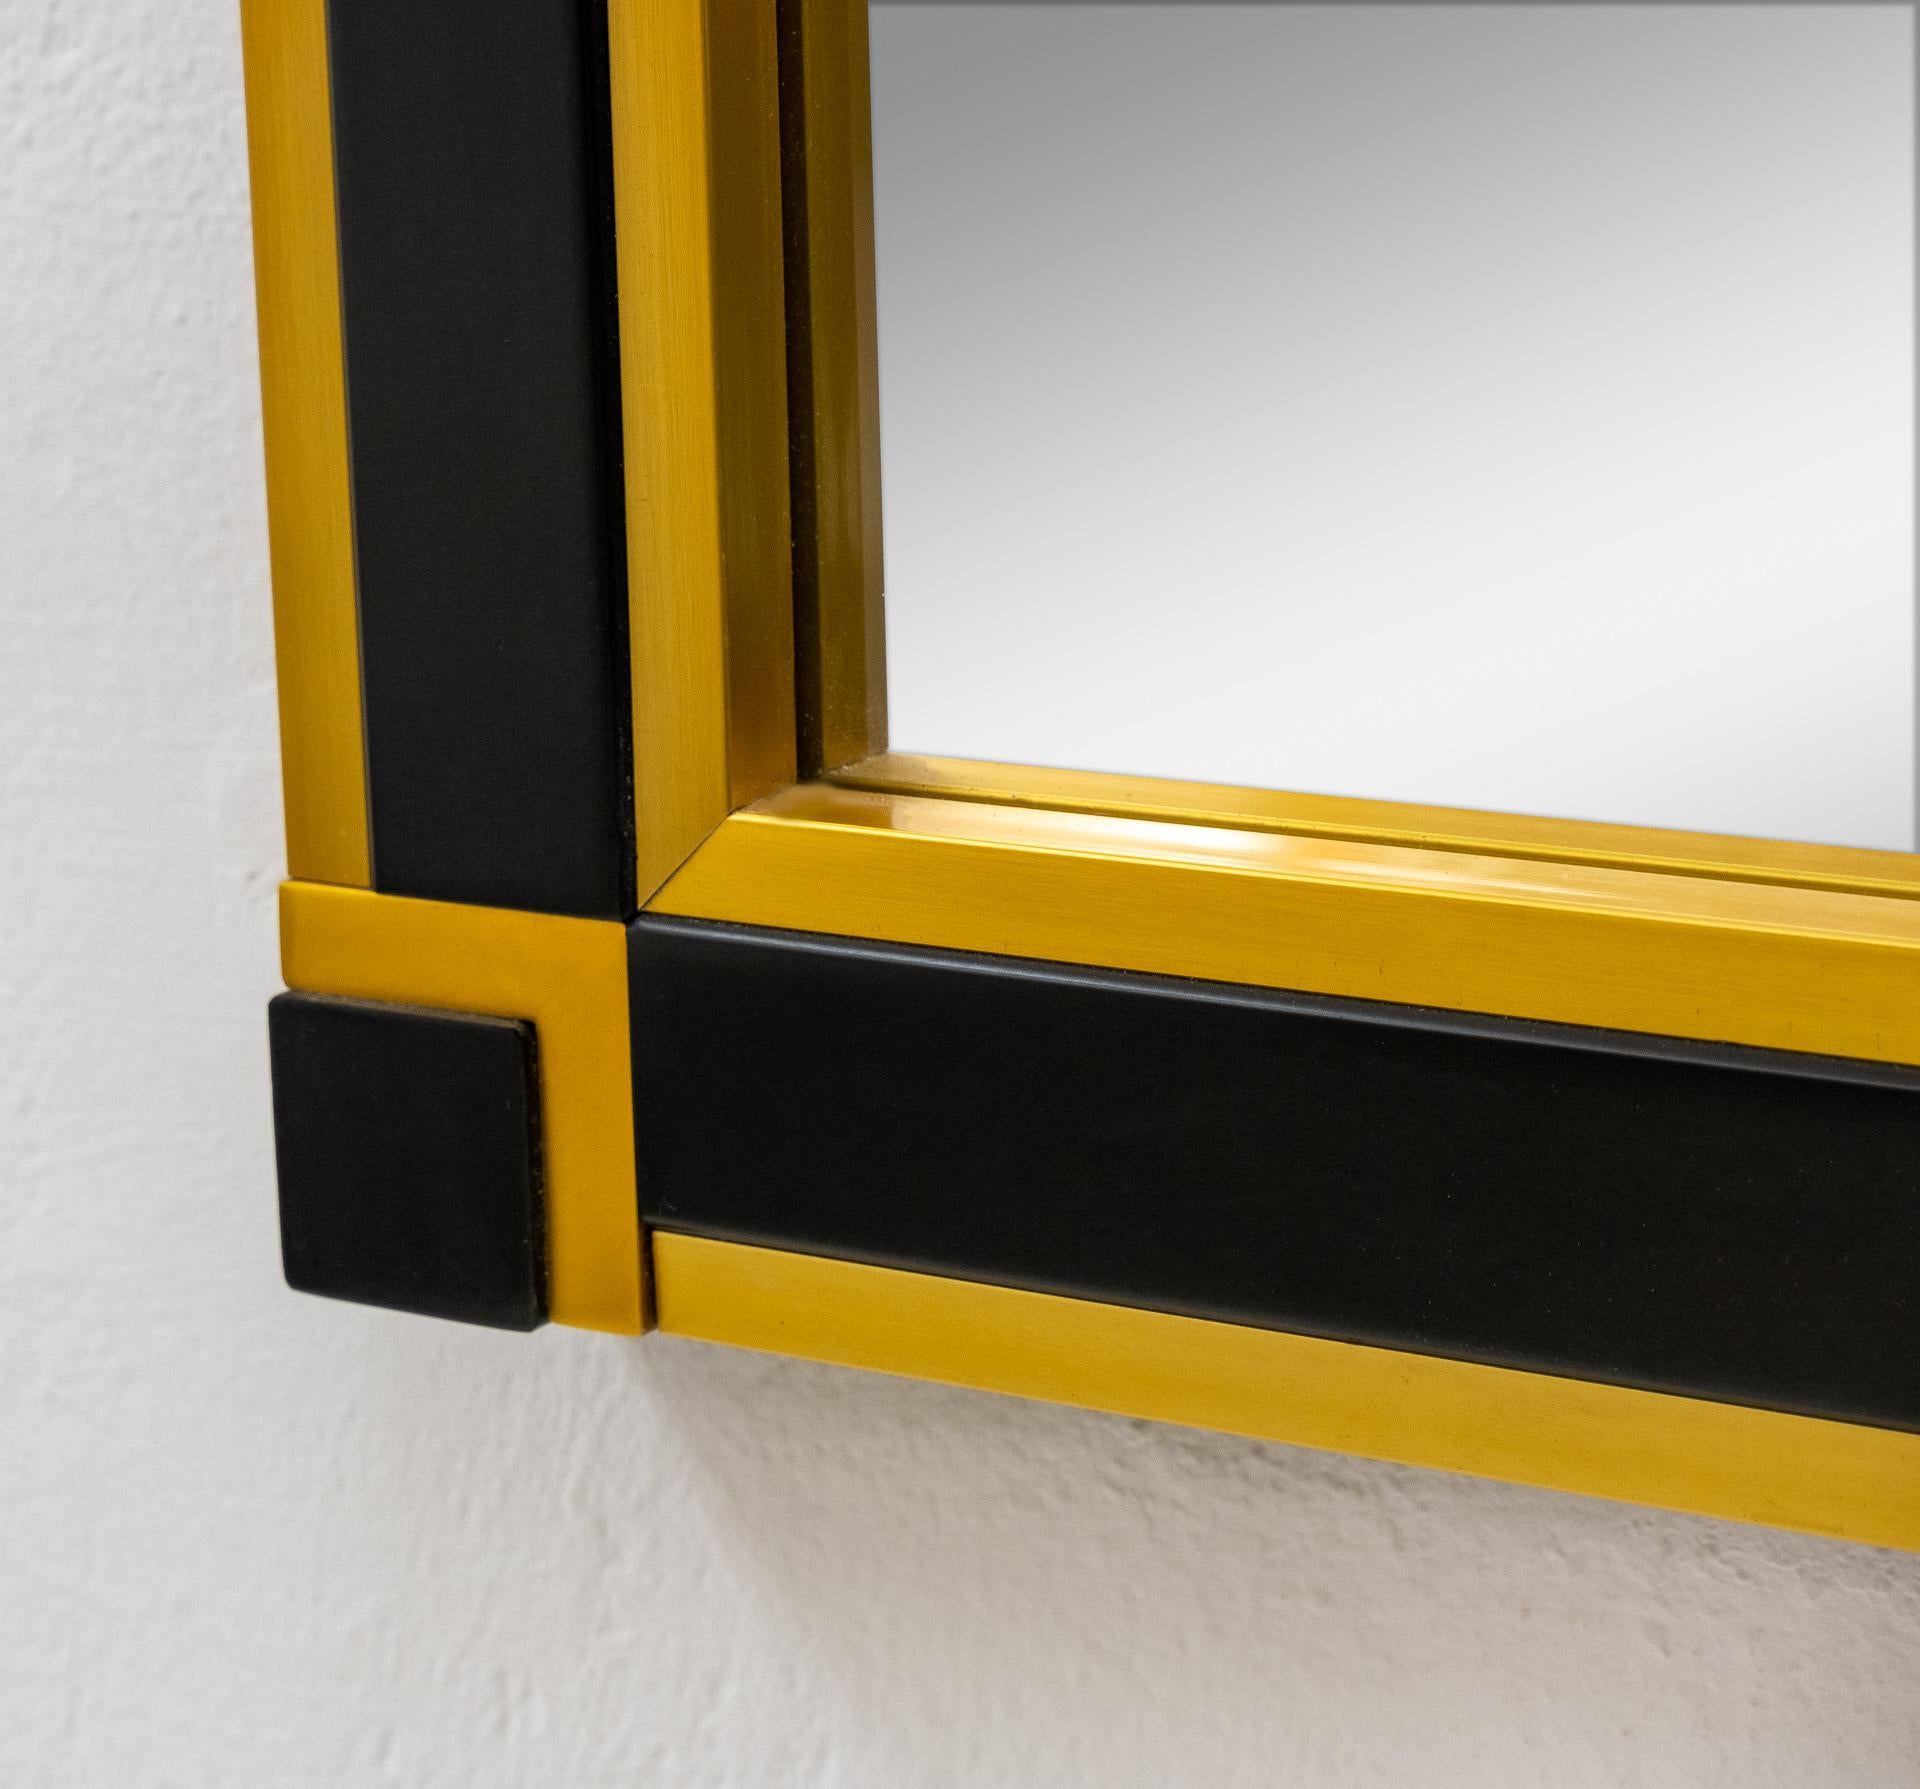 Very nice Postmodern wall mirror. Black wood and gold color brass rim. Good quality mirror.
Made in Italy, 1980s.
       